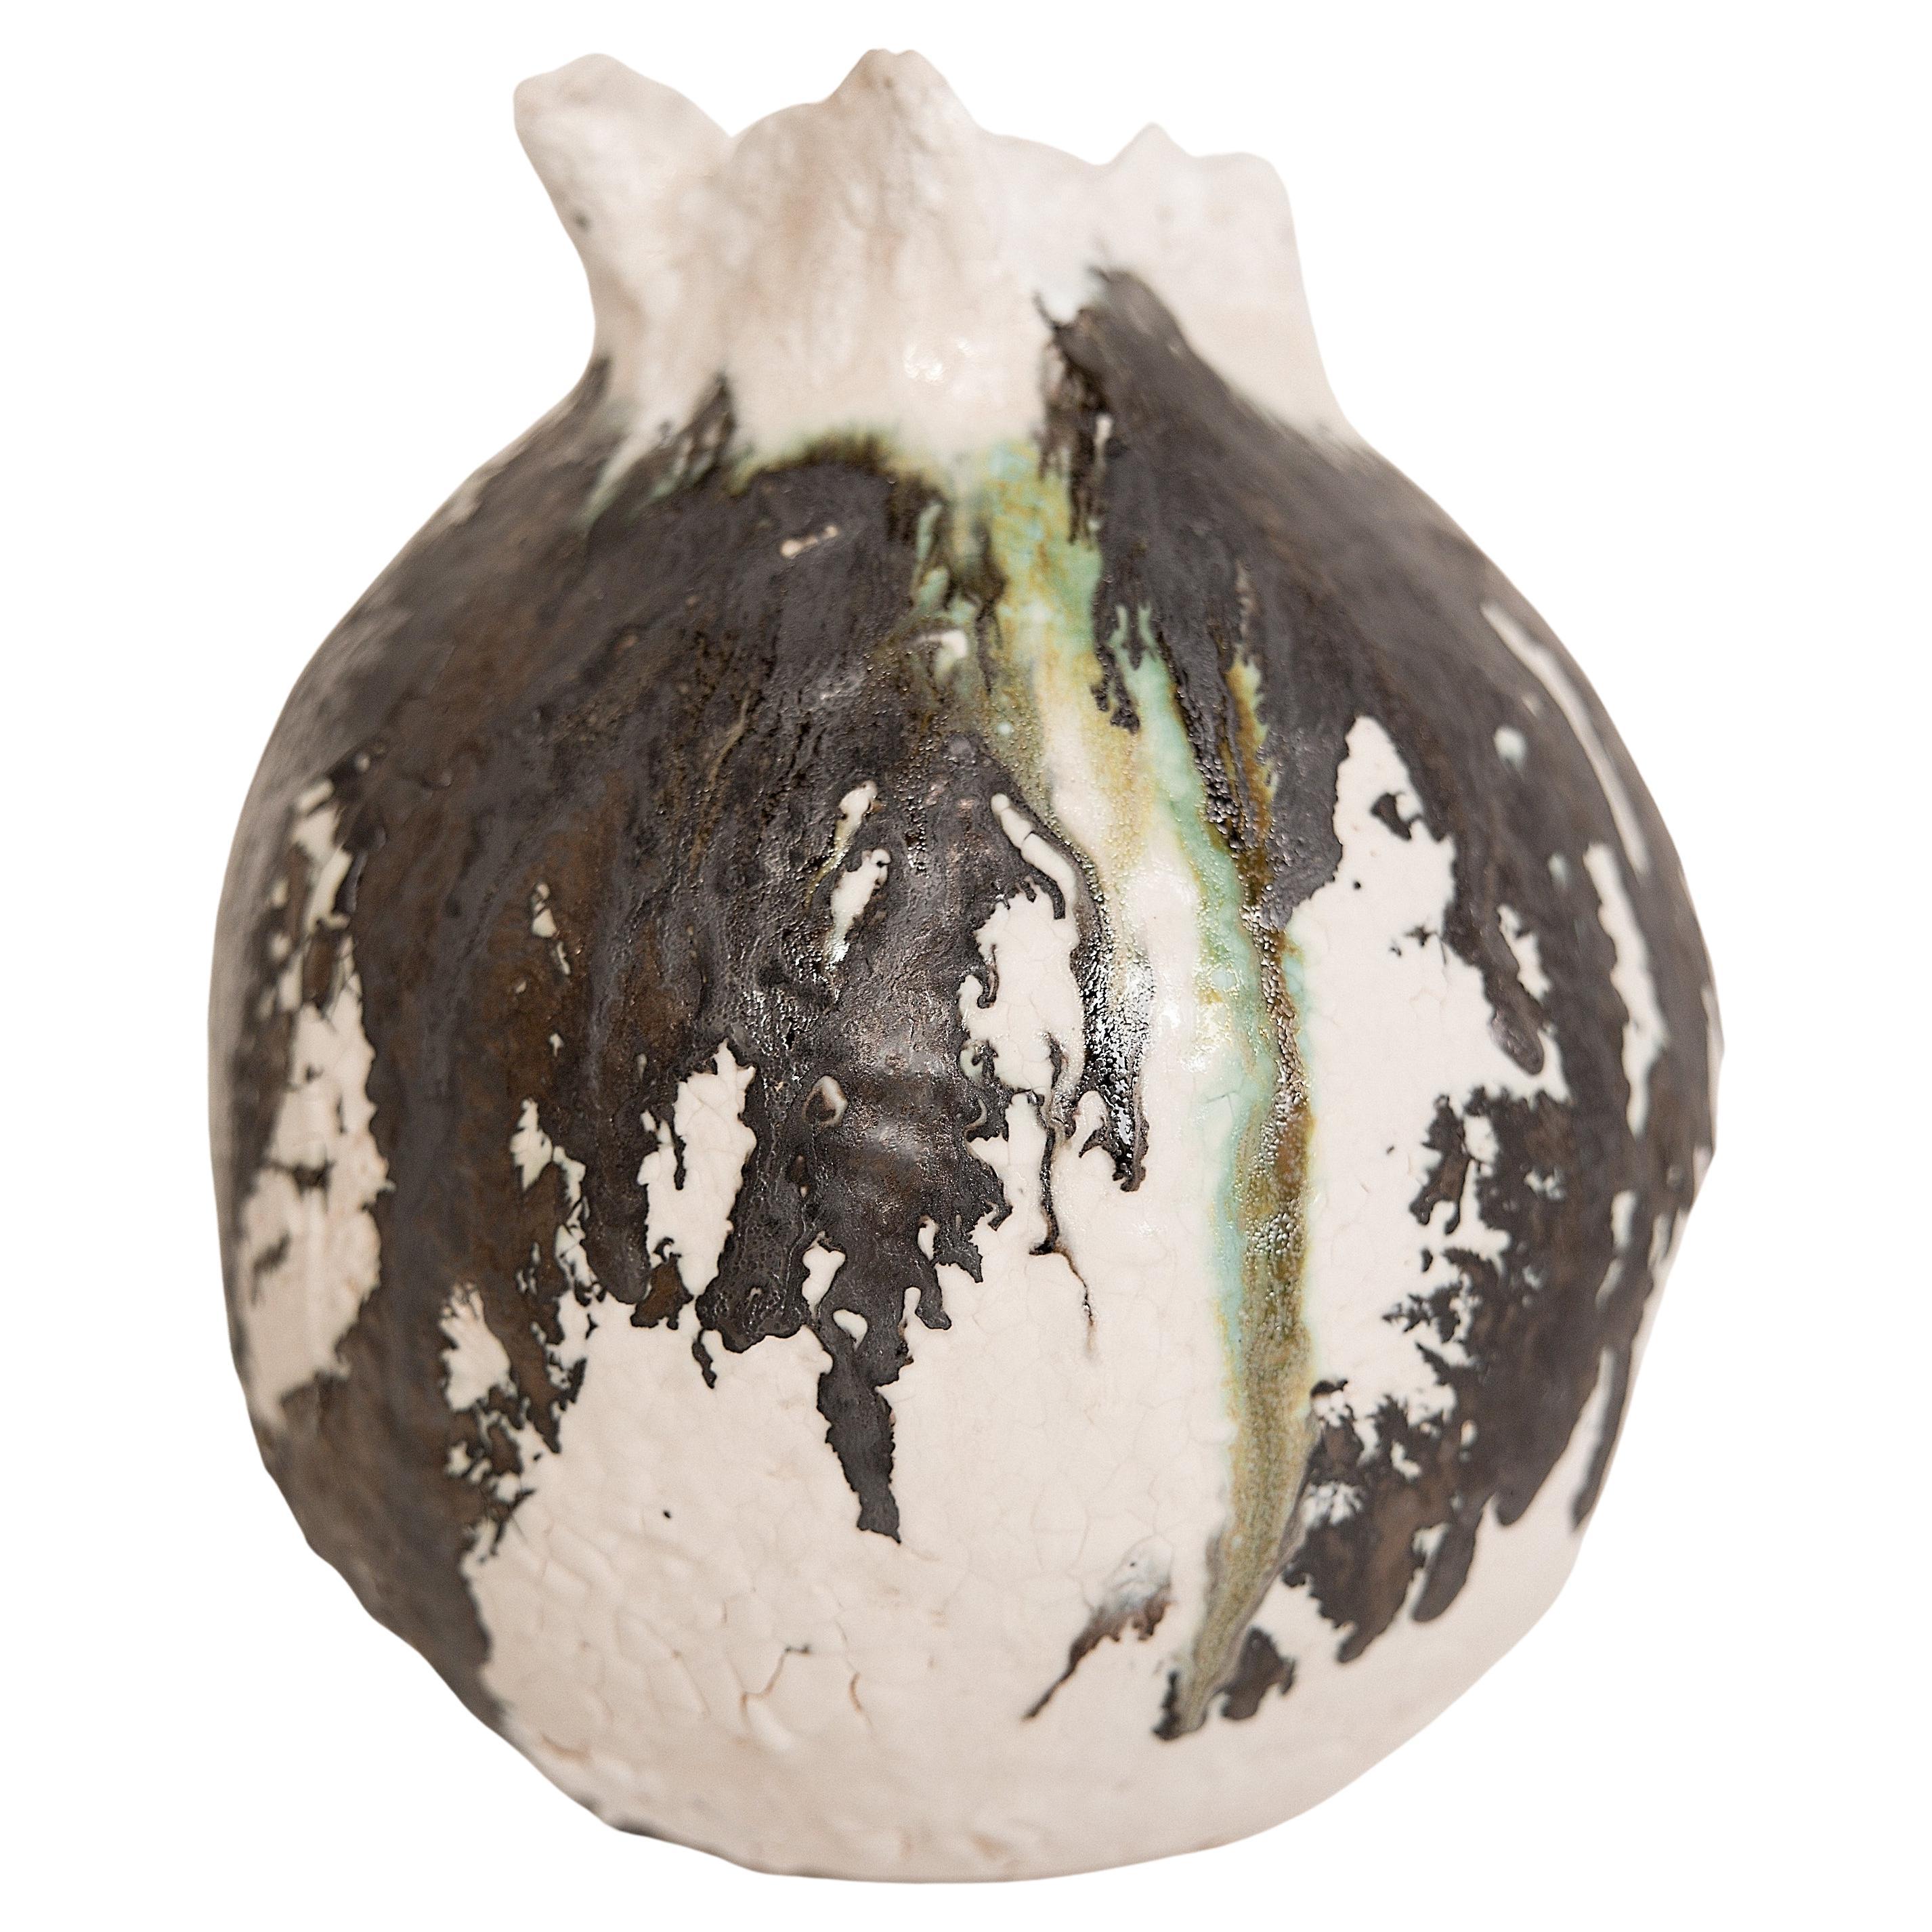 WOODLAND SERIES 

Large Moon Vase approx 12inches tall x 12inches wide
Heavy: 12lbs
a mix of traditional with organic modern this Large Moon jar  shape with texture and many layers of custom glazes. some raw clay, oxides, volcanic glaze
TEST FOR